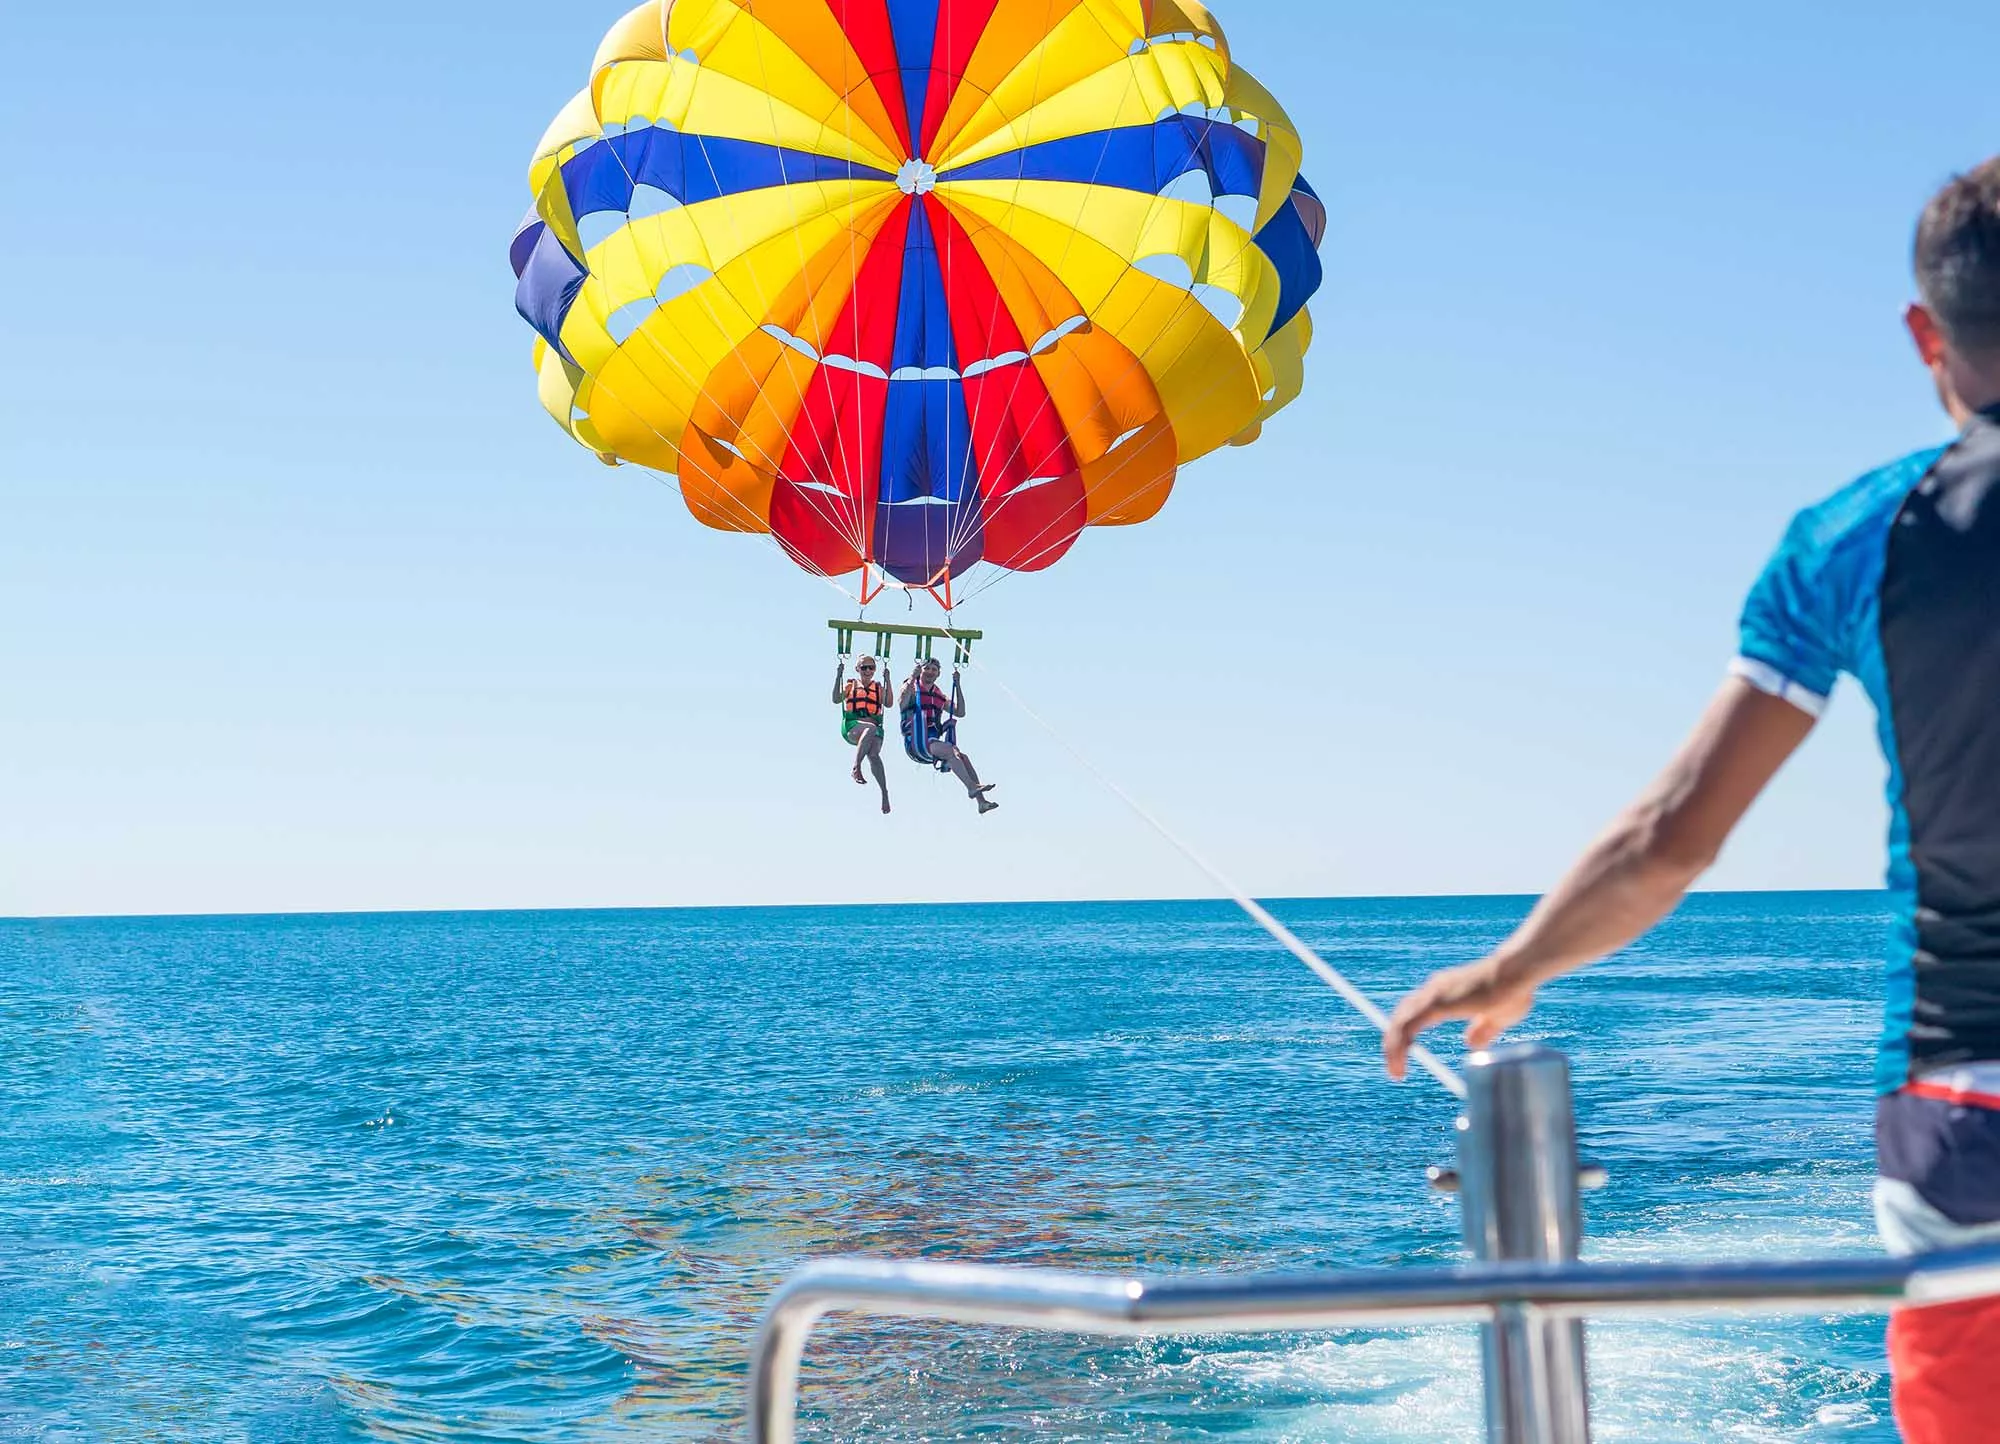 Sky & Sea Adventures in United Arab Emirates, Middle East | Parasailing,Jet Skiing - Rated 1.1